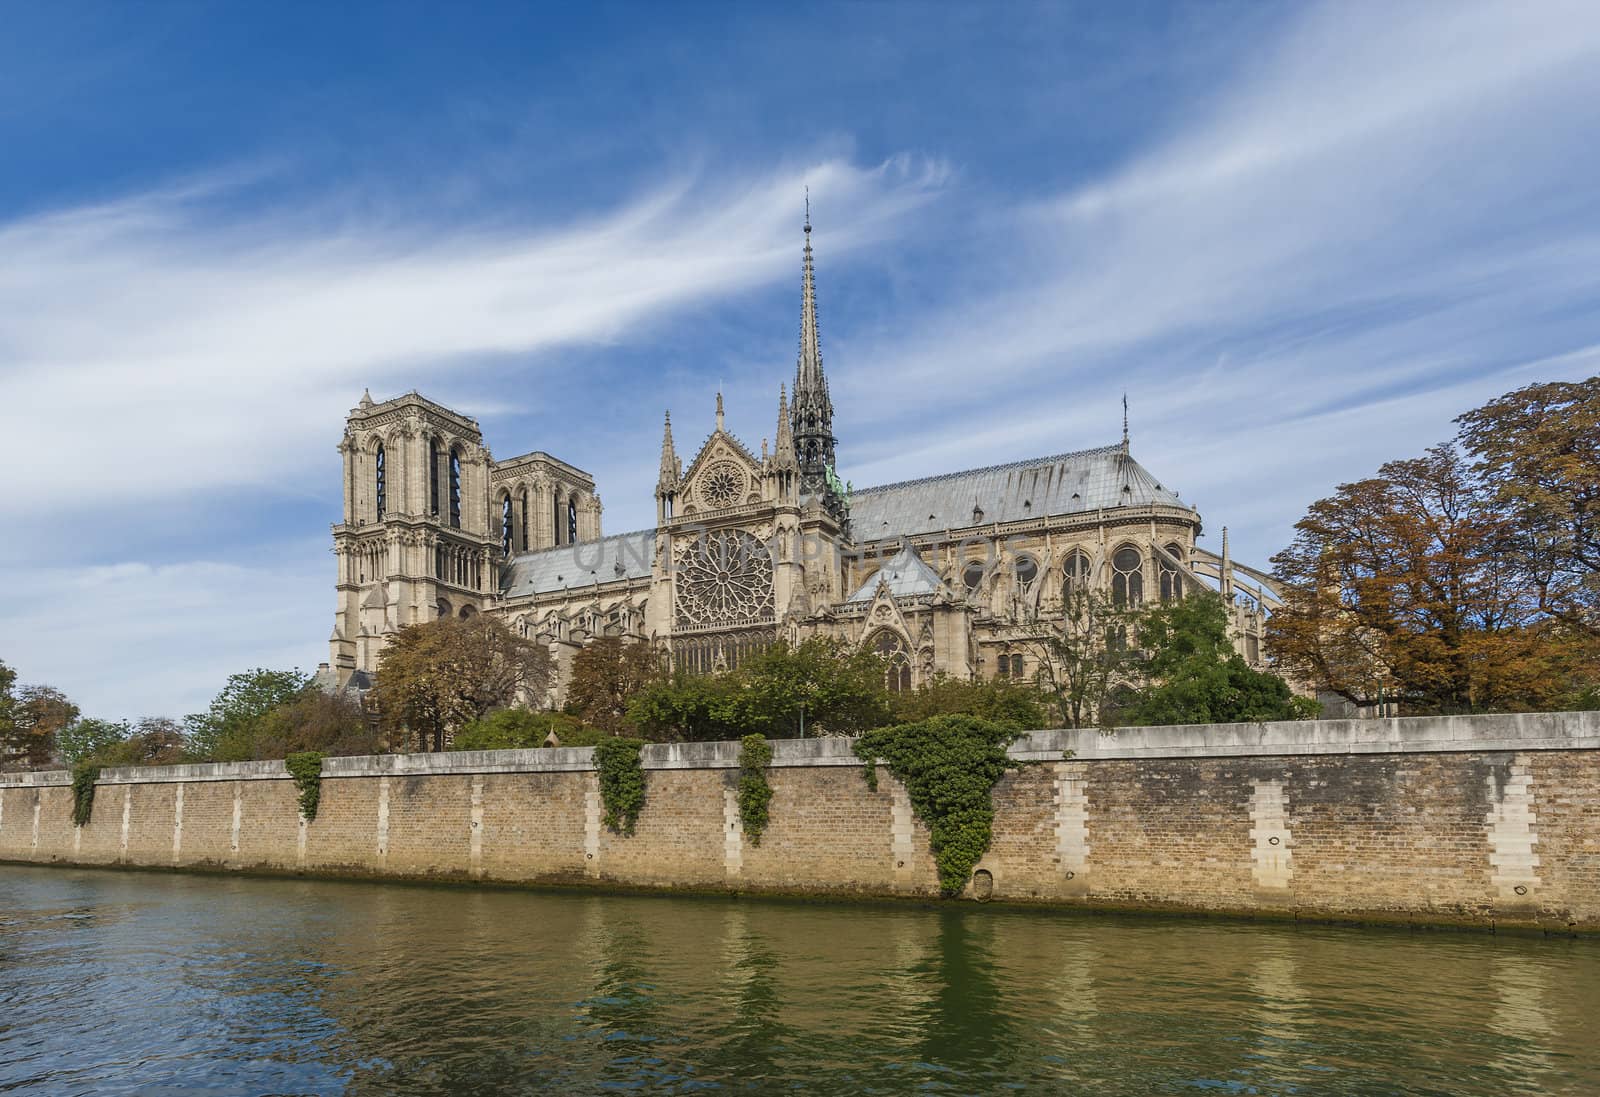 Notre Dame Cathedral started in the 12th century, located in Paris, France